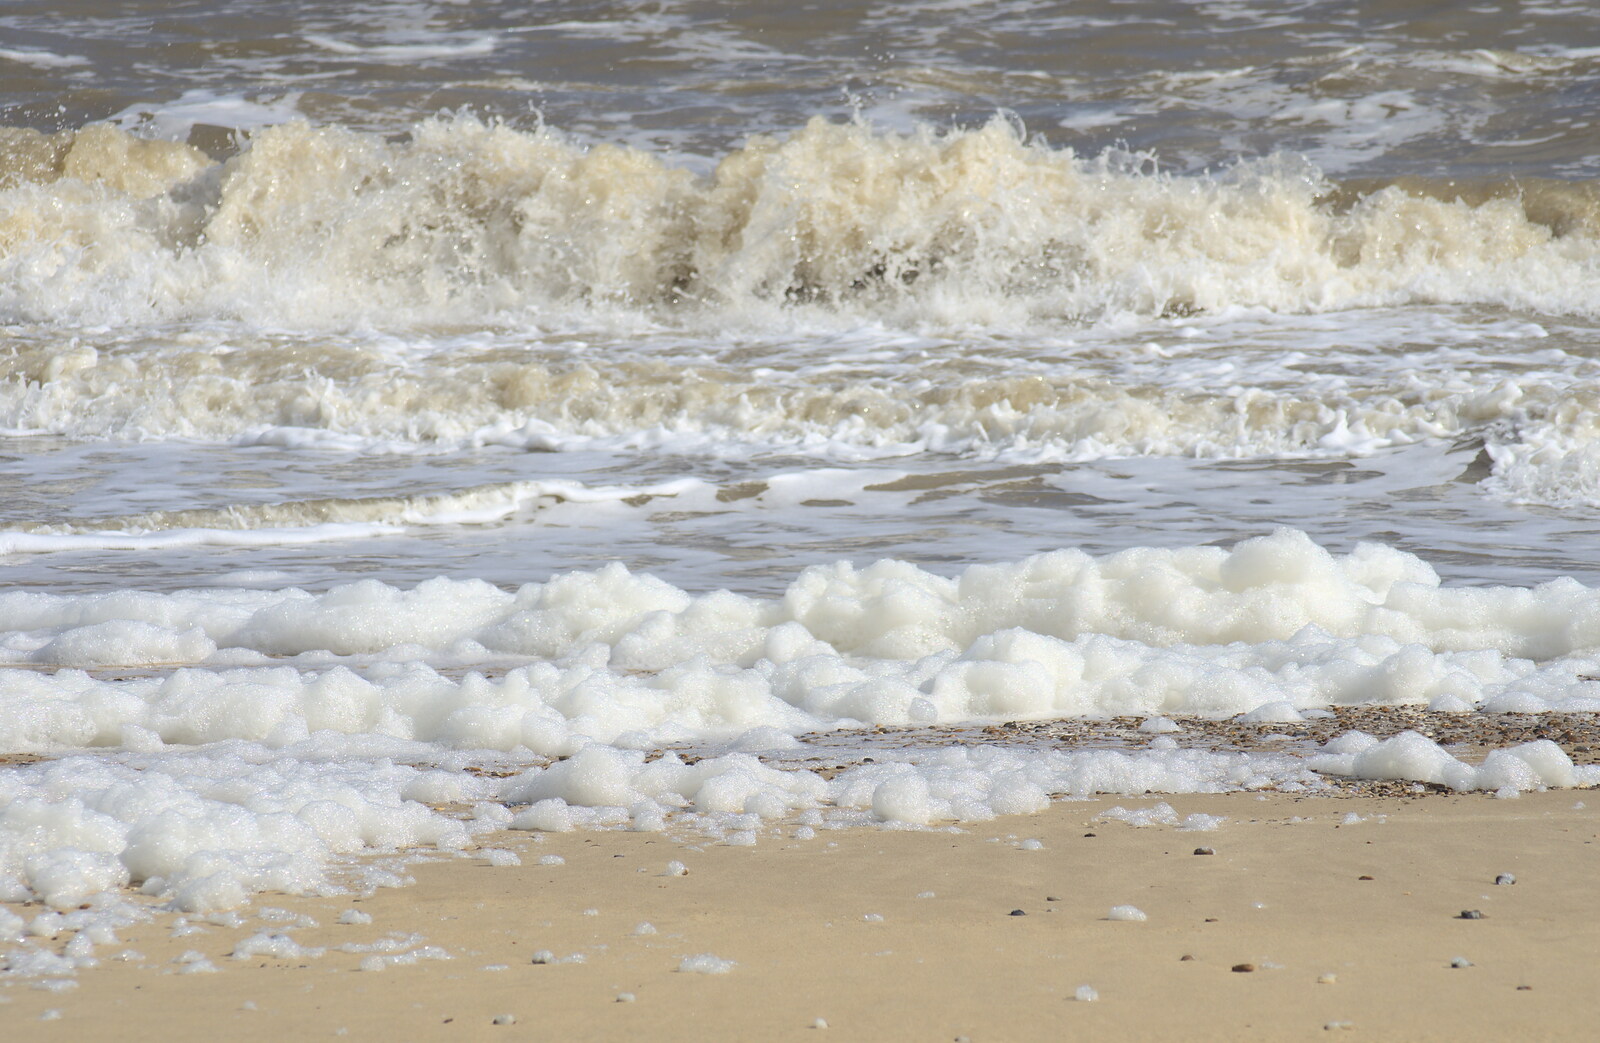 Crashing waves and sea foam from Southwold By The Sea, Suffolk - 29th September 2013